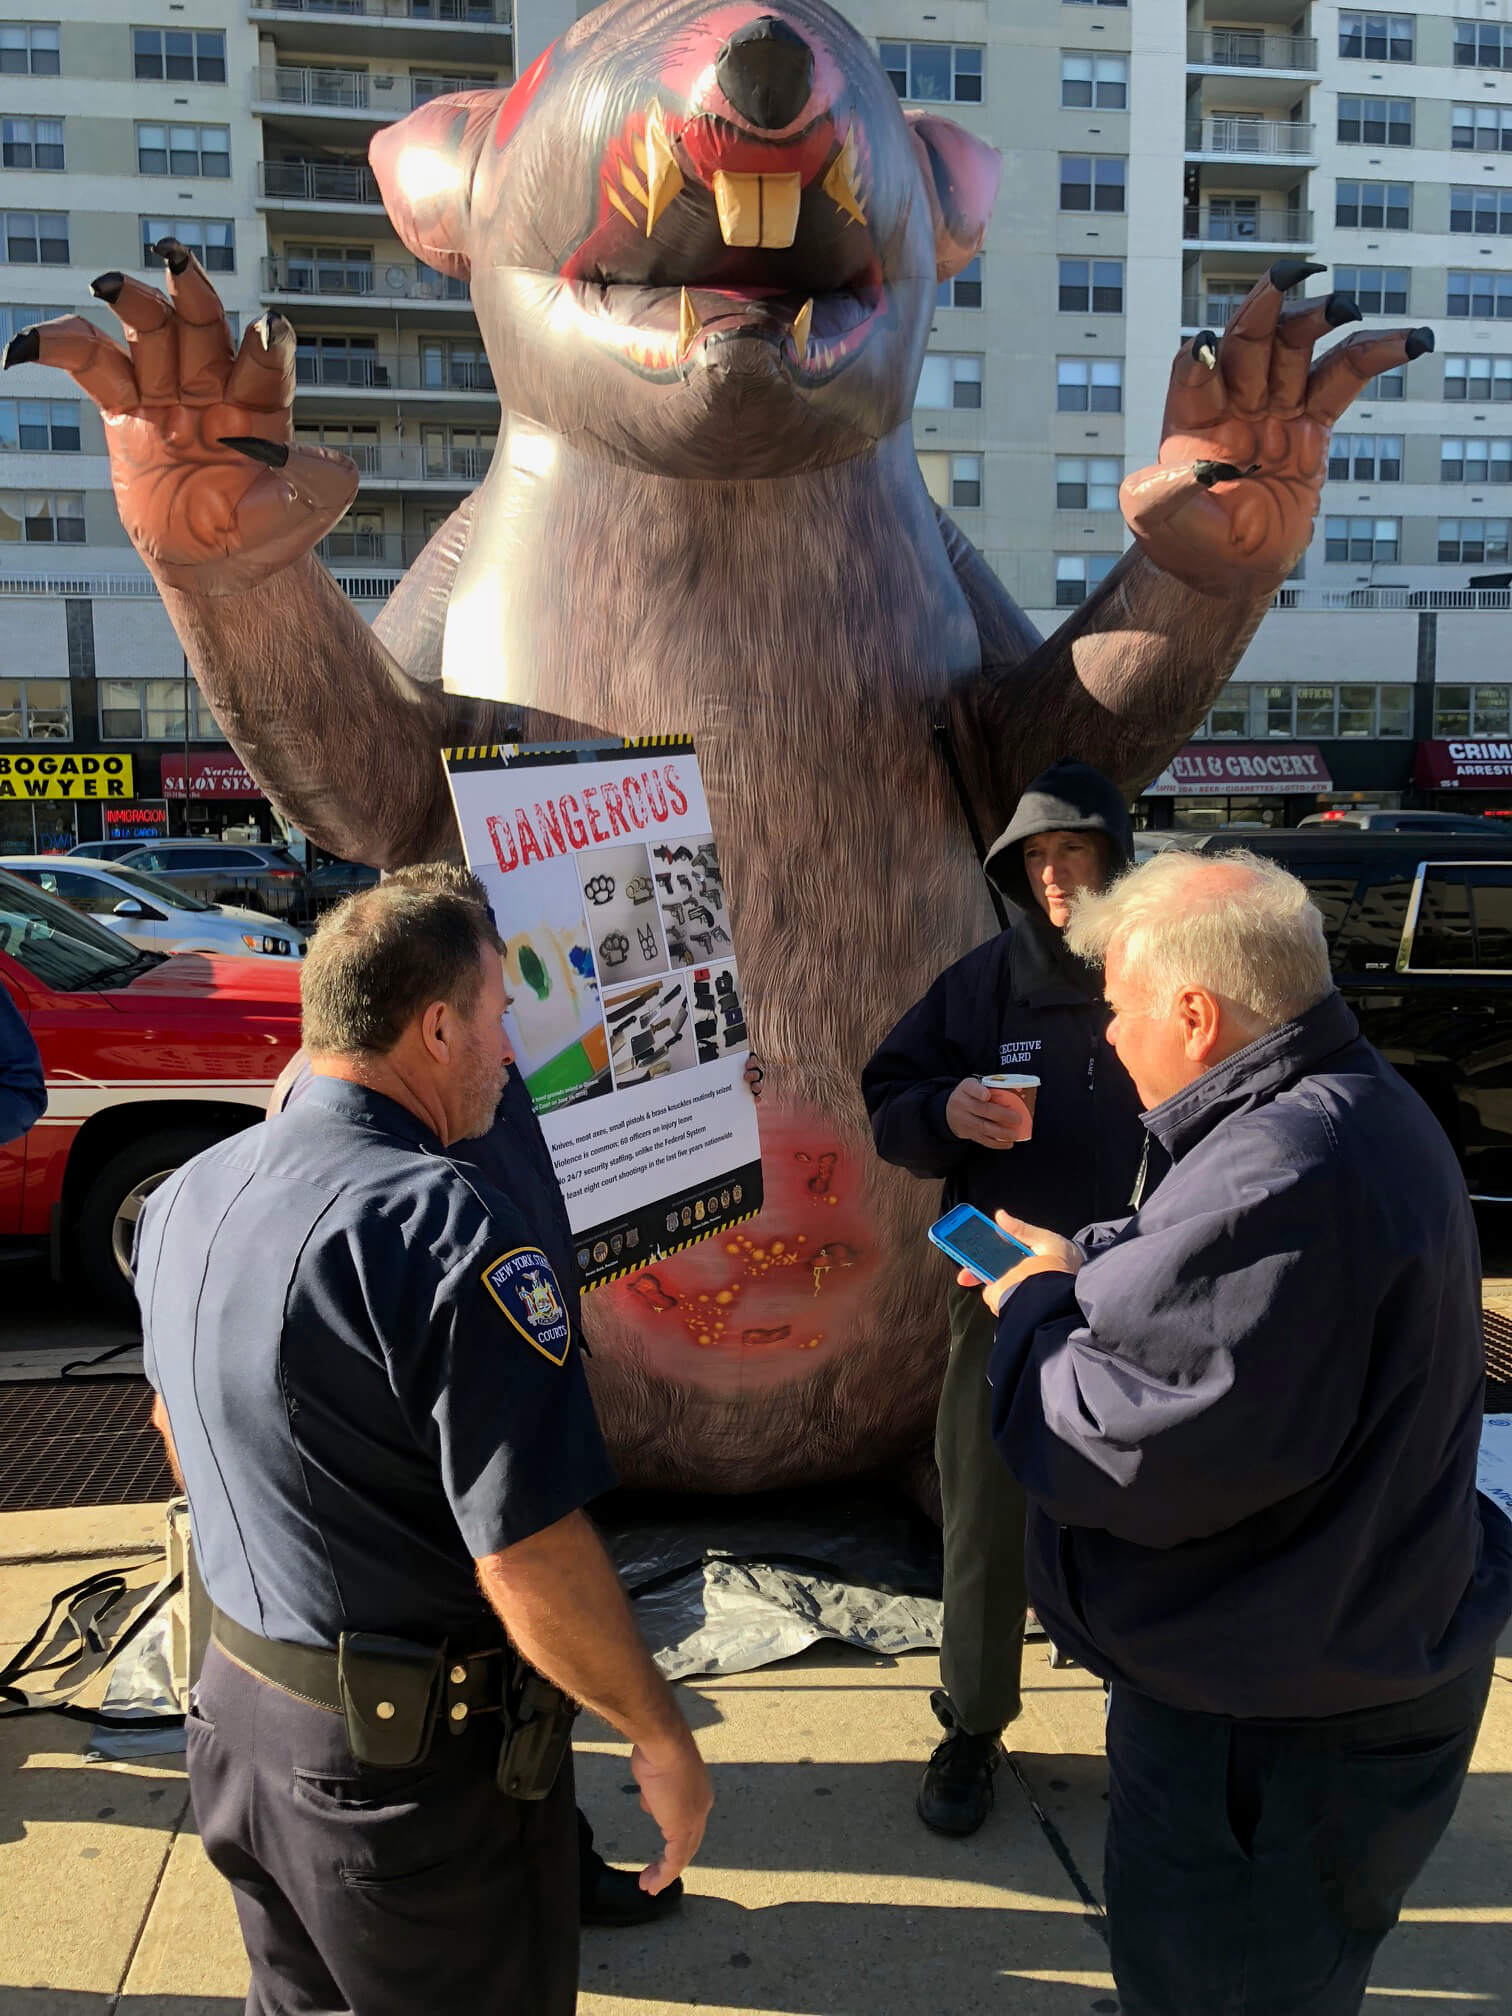 Court officers rally around an inflatable known as “Scabby the Rat” outside the Kew Gardens State Supreme Court House as they warn to public that understaffing in their ranks is causing a dangerous situation inside courtrooms.